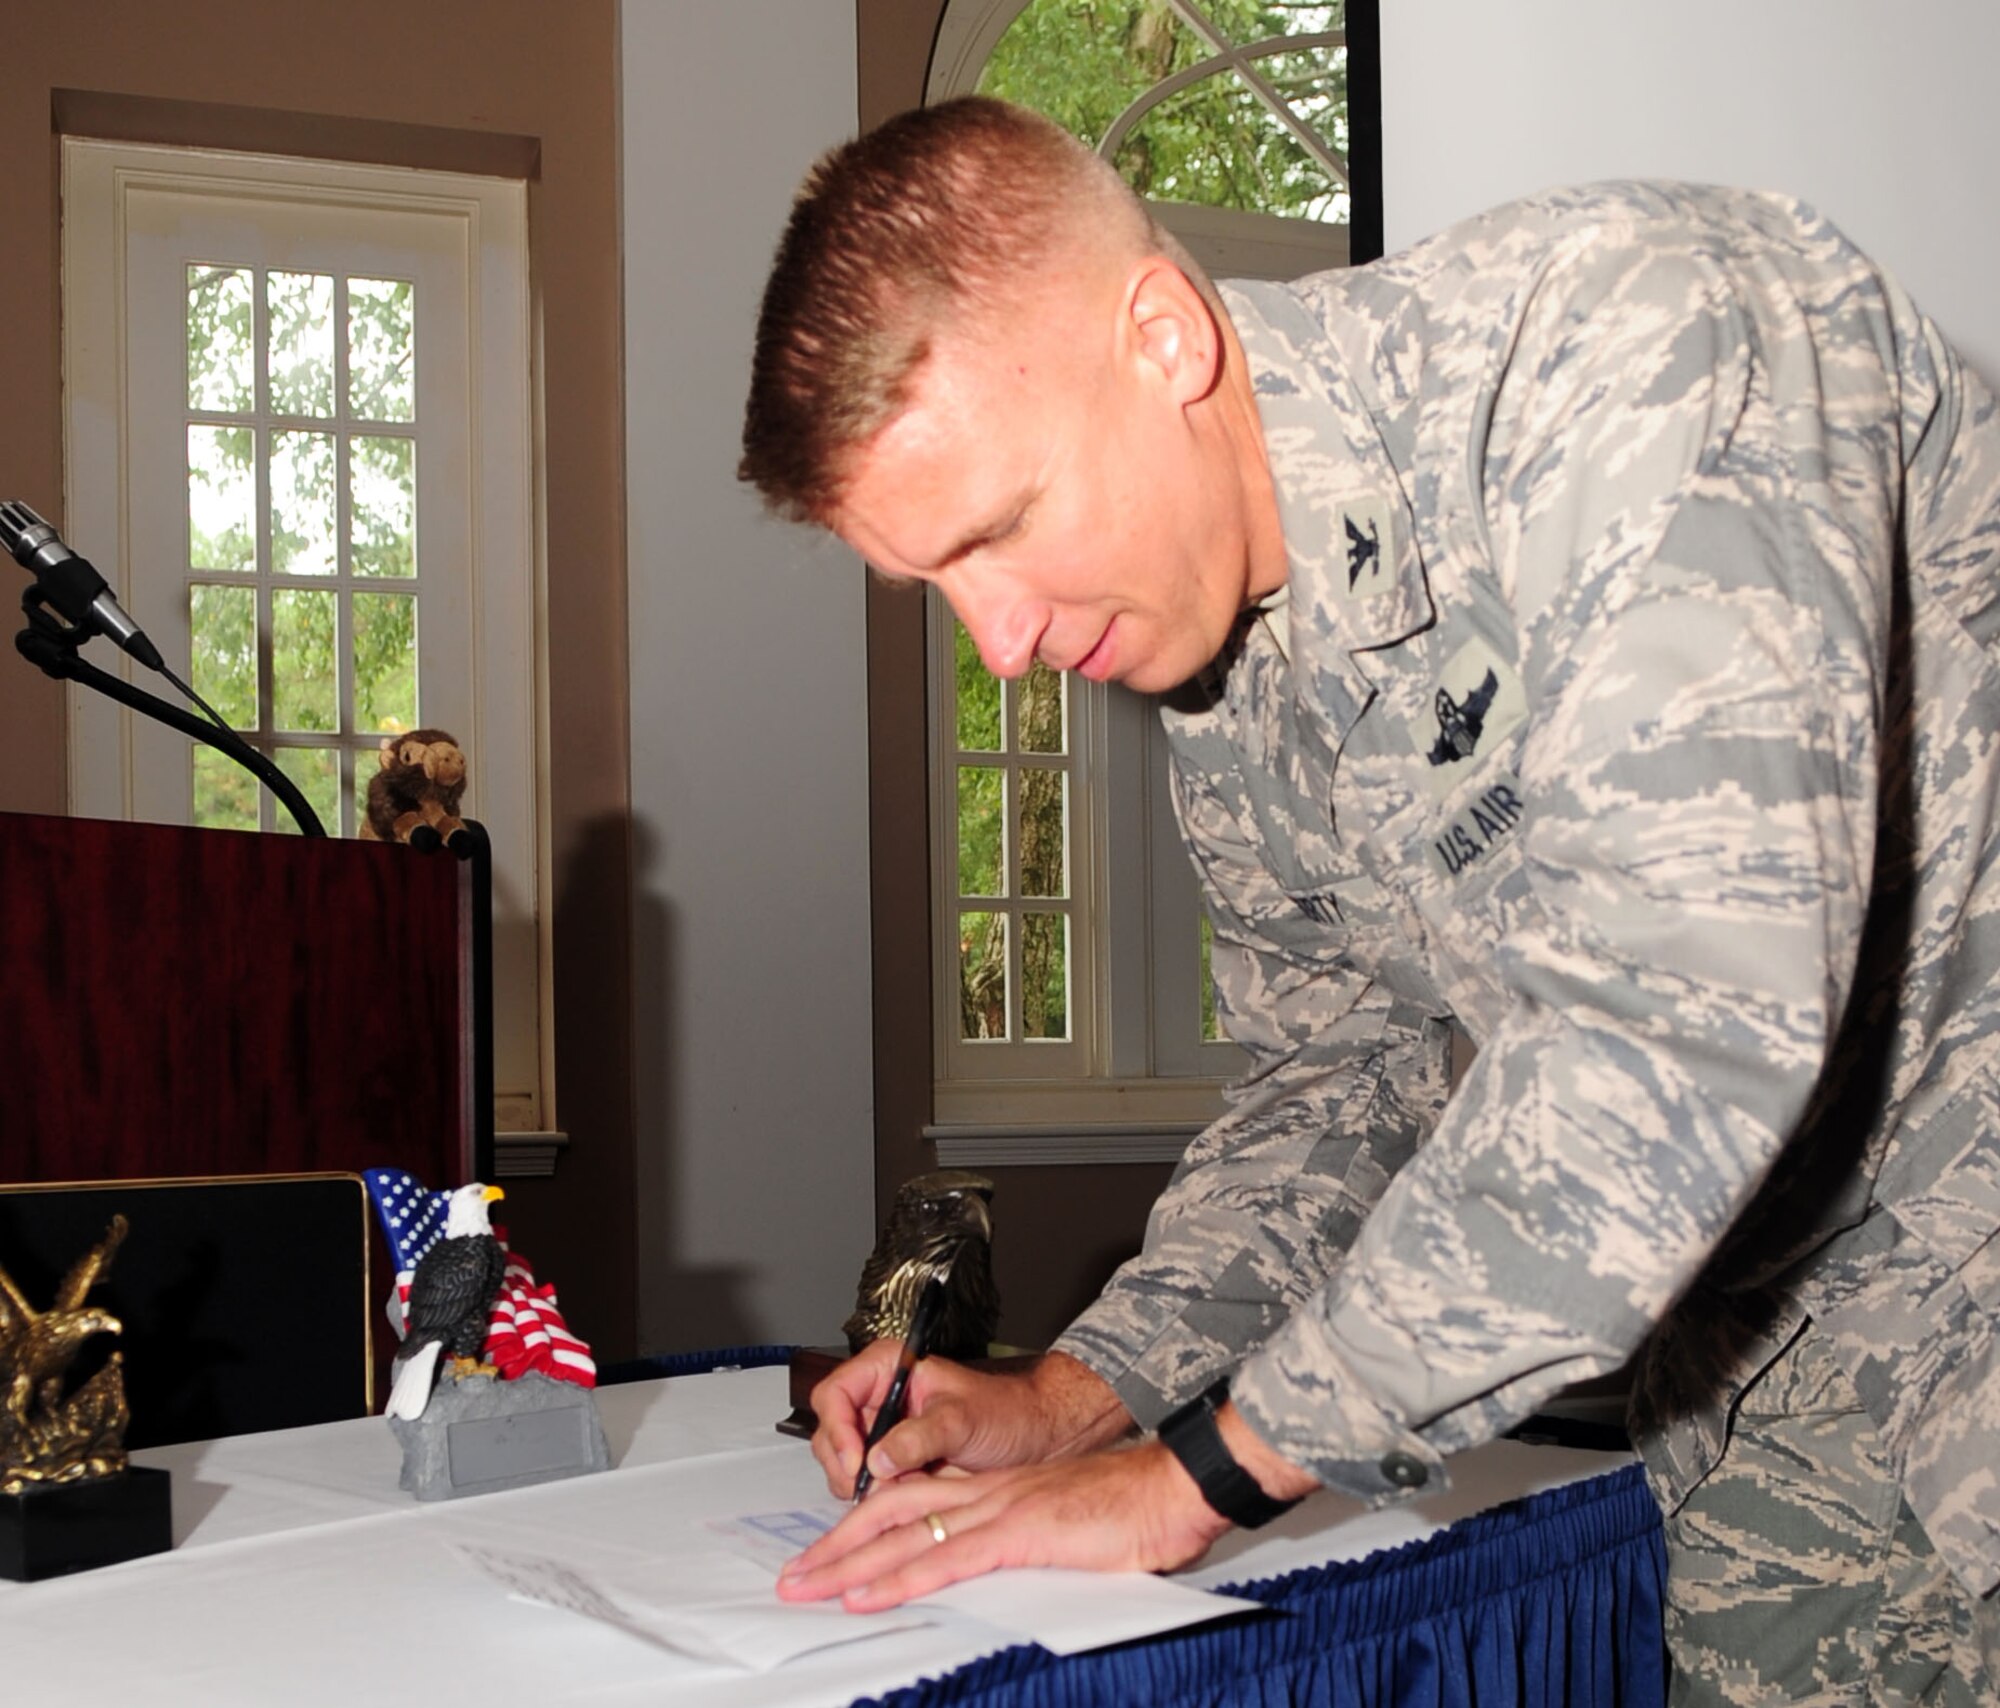 Col. Patrick Doherty, 4th Fighter Wing vice commander, signs the first donation slip for the Combined Federal Campaign kicking off this year’s campaign at Seymour Johnson Air Force Base, N.C., Oct. 6, 2009. The CFC is the world’s largest and most successful single fundraising campaign, with more than 2,500 organizations ranging from those benefiting veterans to providing scholarships for high school students. (U.S. Air Force Photo/Airman 1st Class Rae Perry)